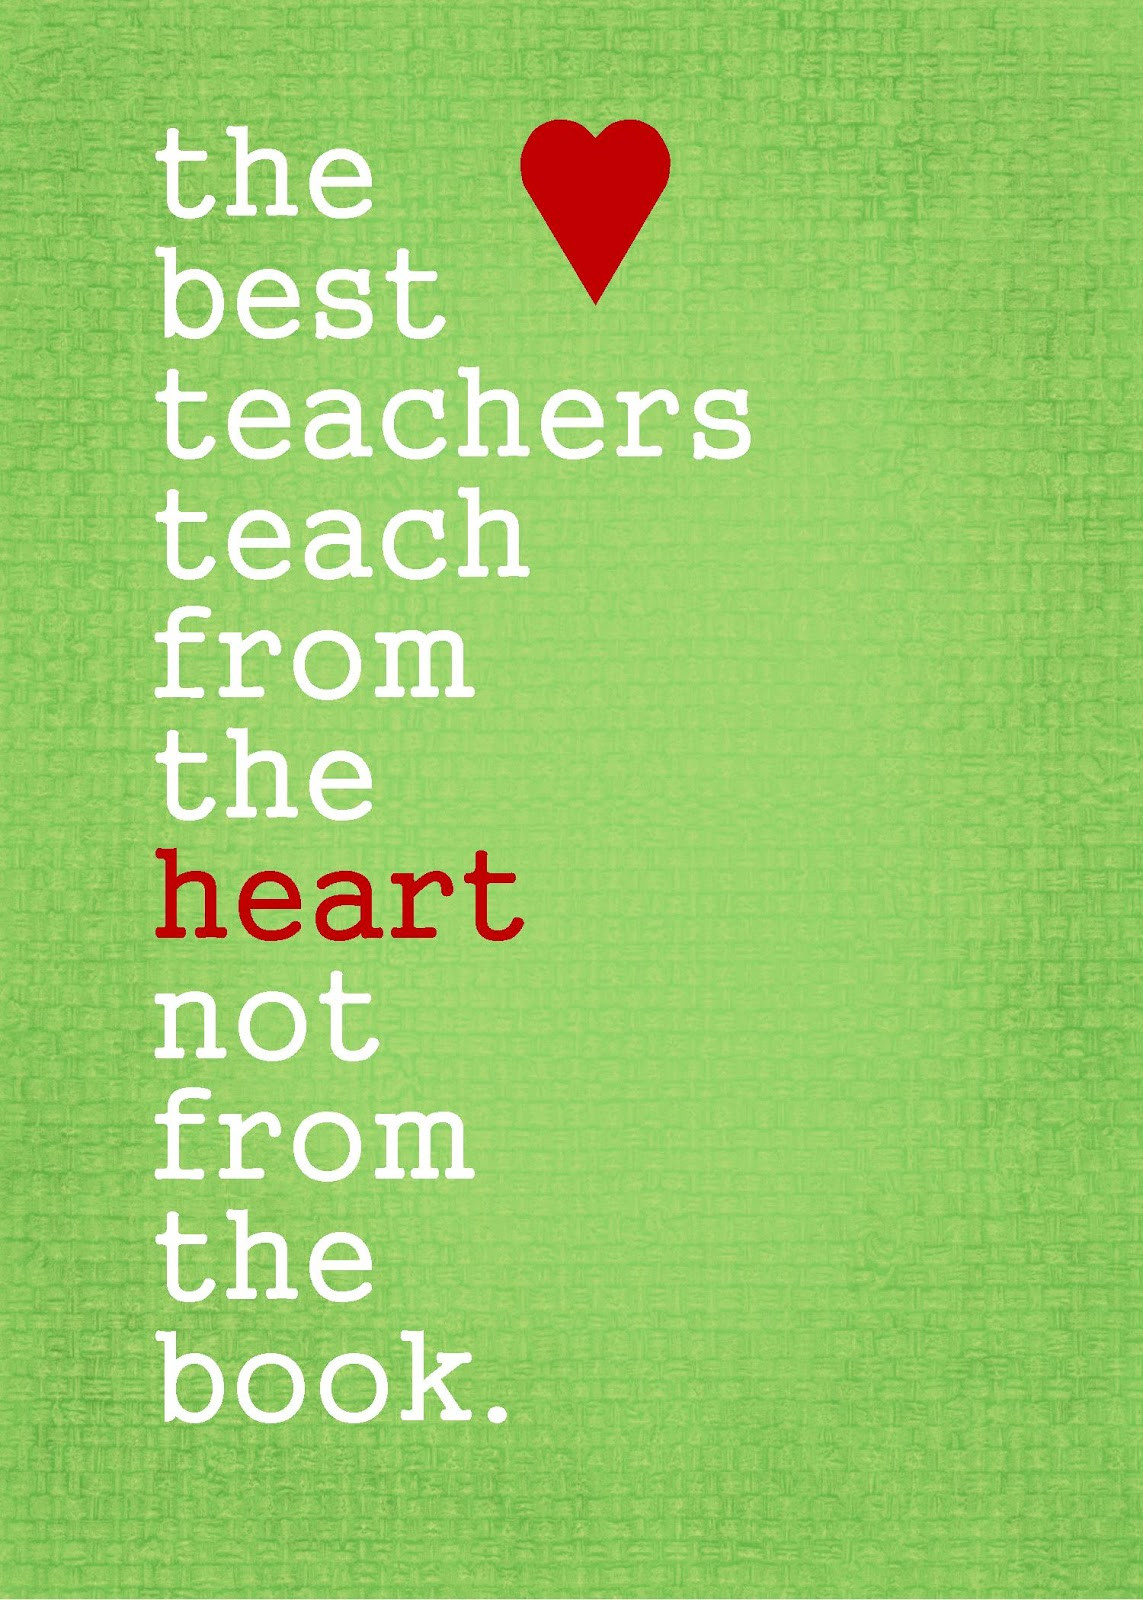 Teacher Love Quotes
 Full of Great Ideas Teacher Gifts Free printable quotes